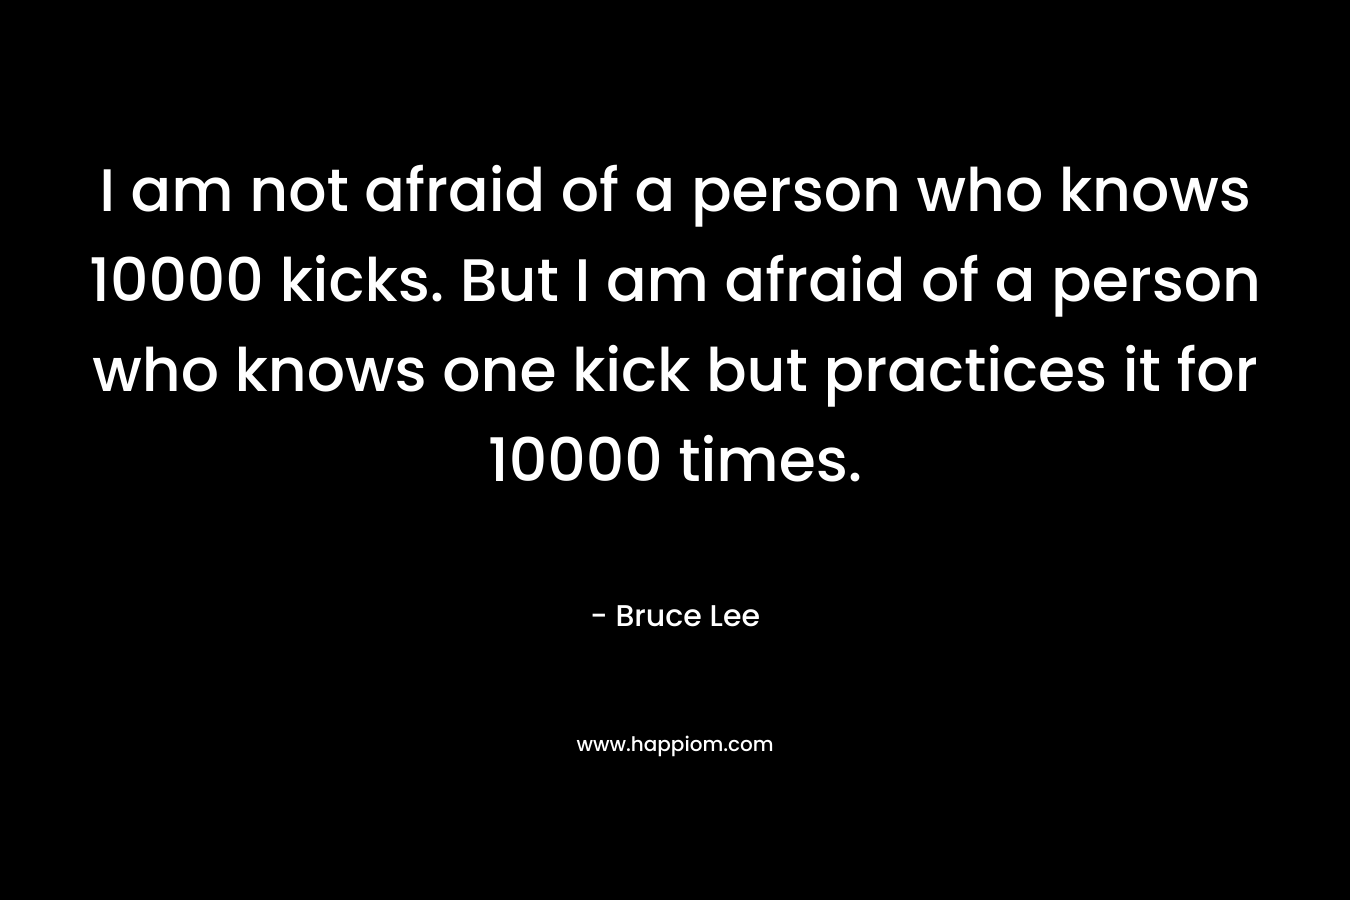 I am not afraid of a person who knows 10000 kicks. But I am afraid of a person who knows one kick but practices it for 10000 times.